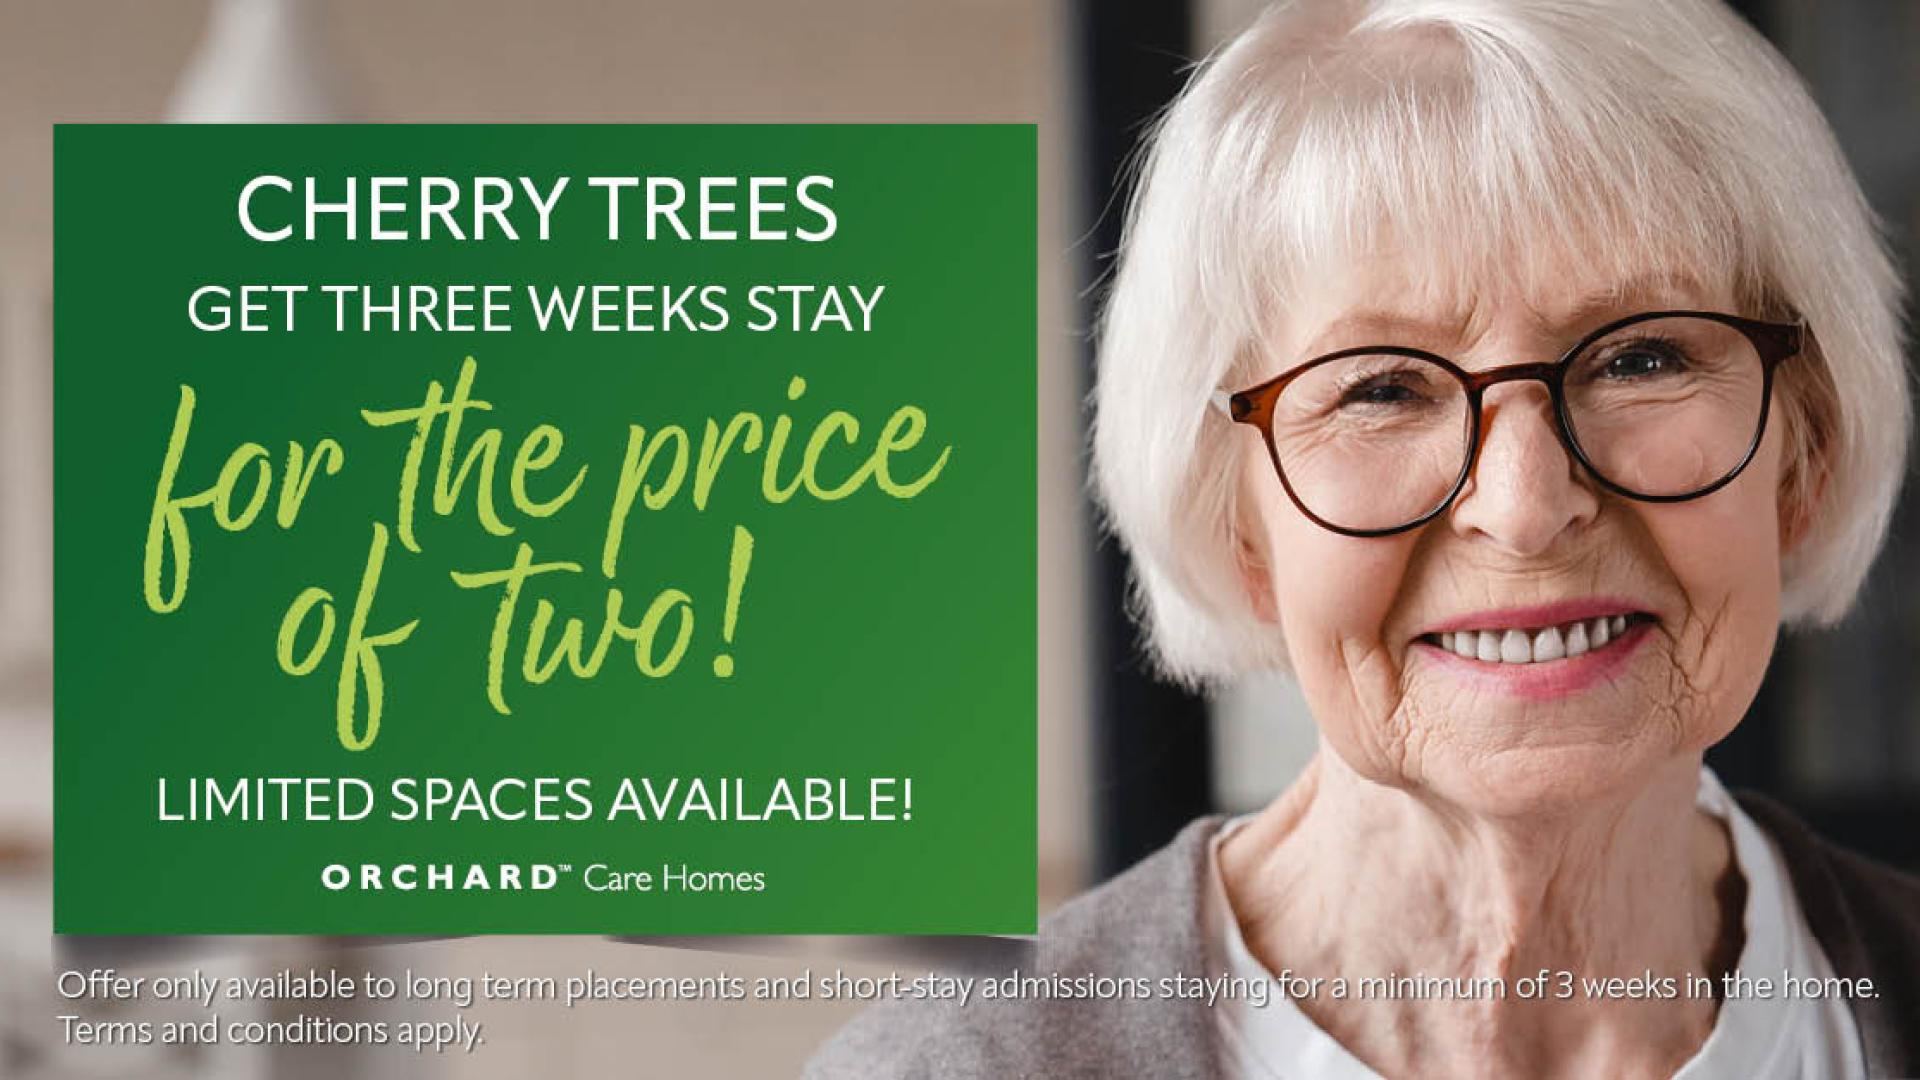 Stay at Cherry Trees Care Home for 3 weeks, but only pay for 2 weeks